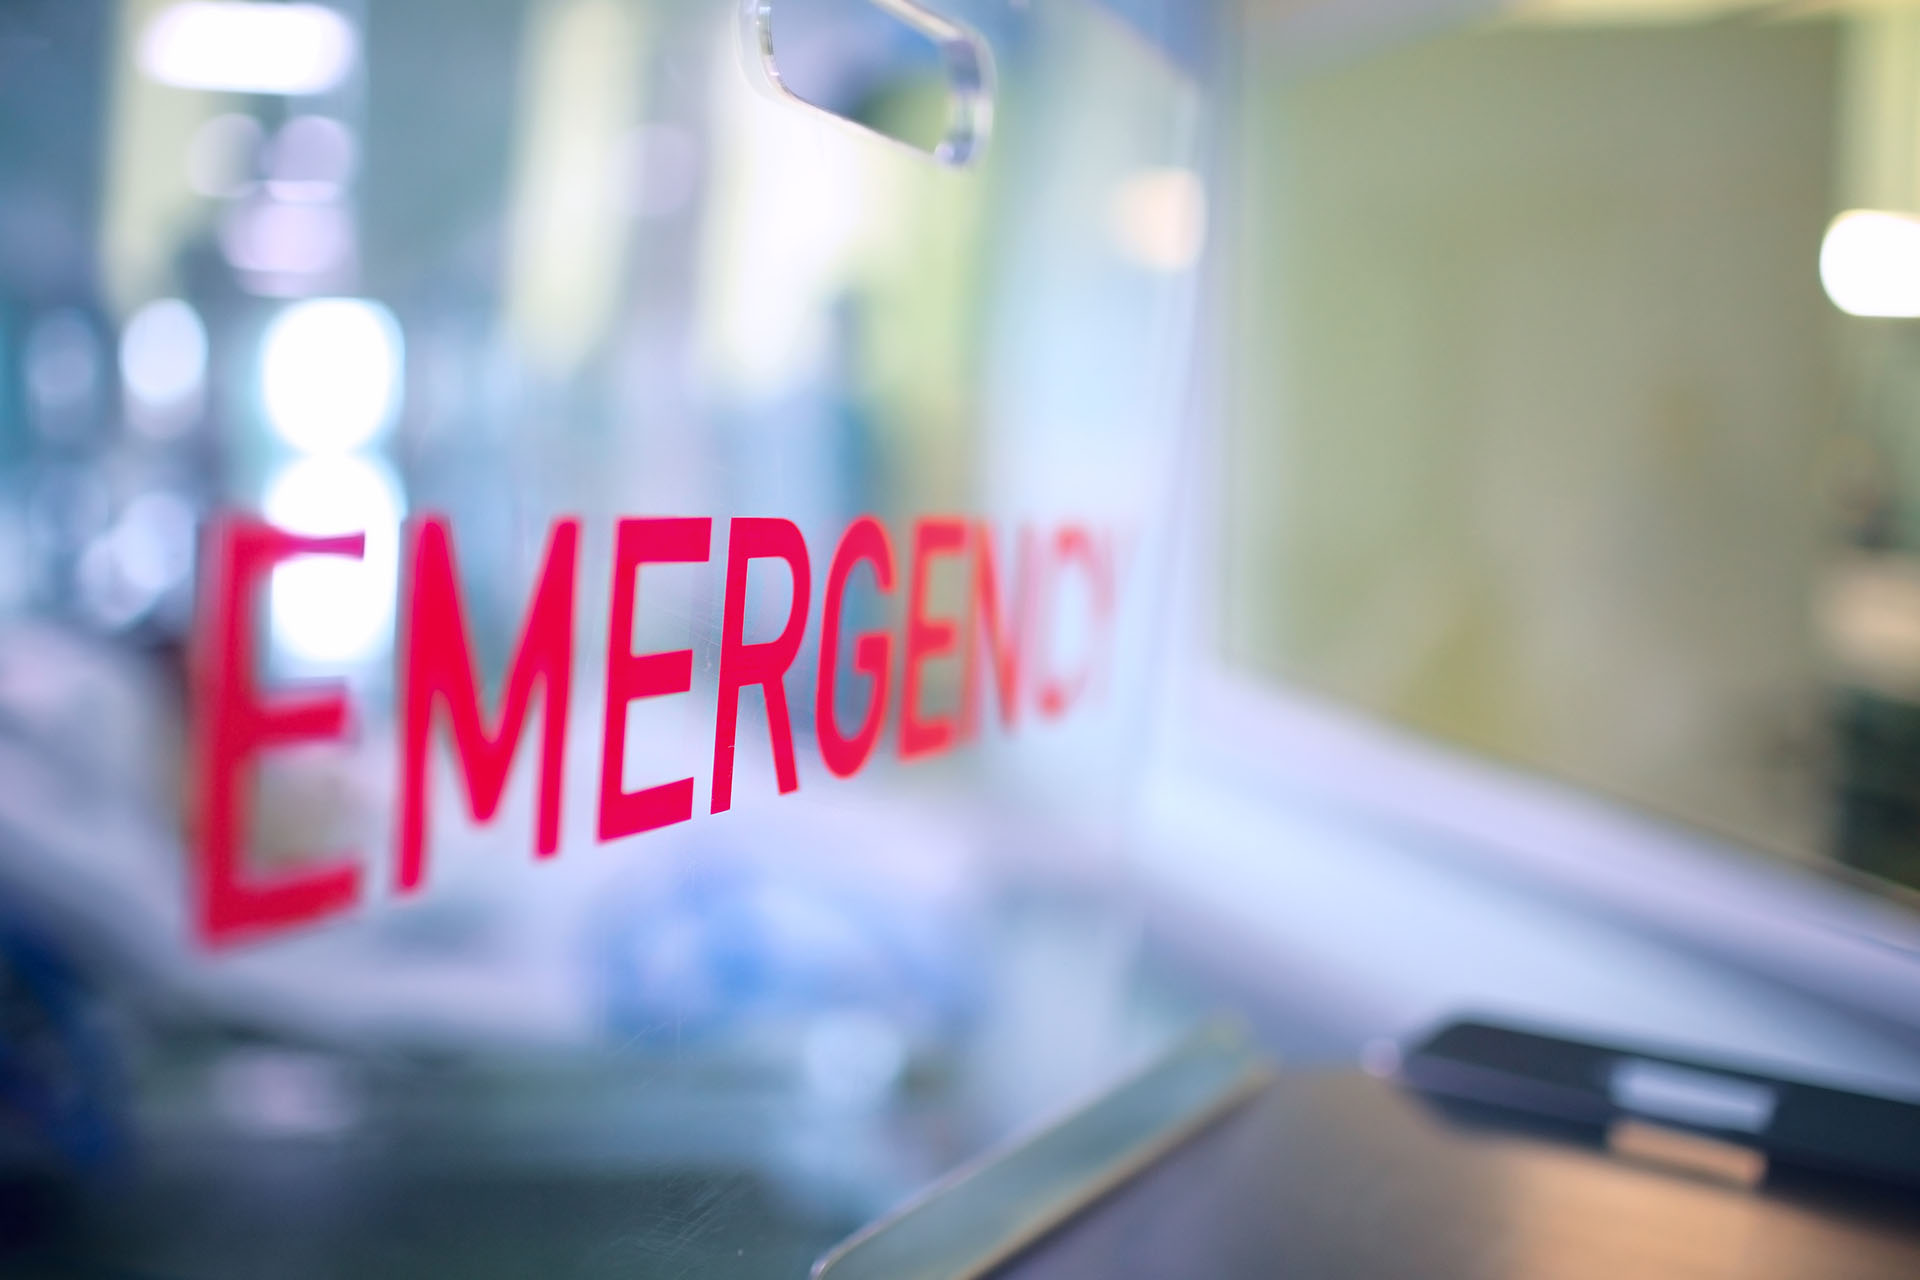 Close up image of Emergency room signage in red lettering